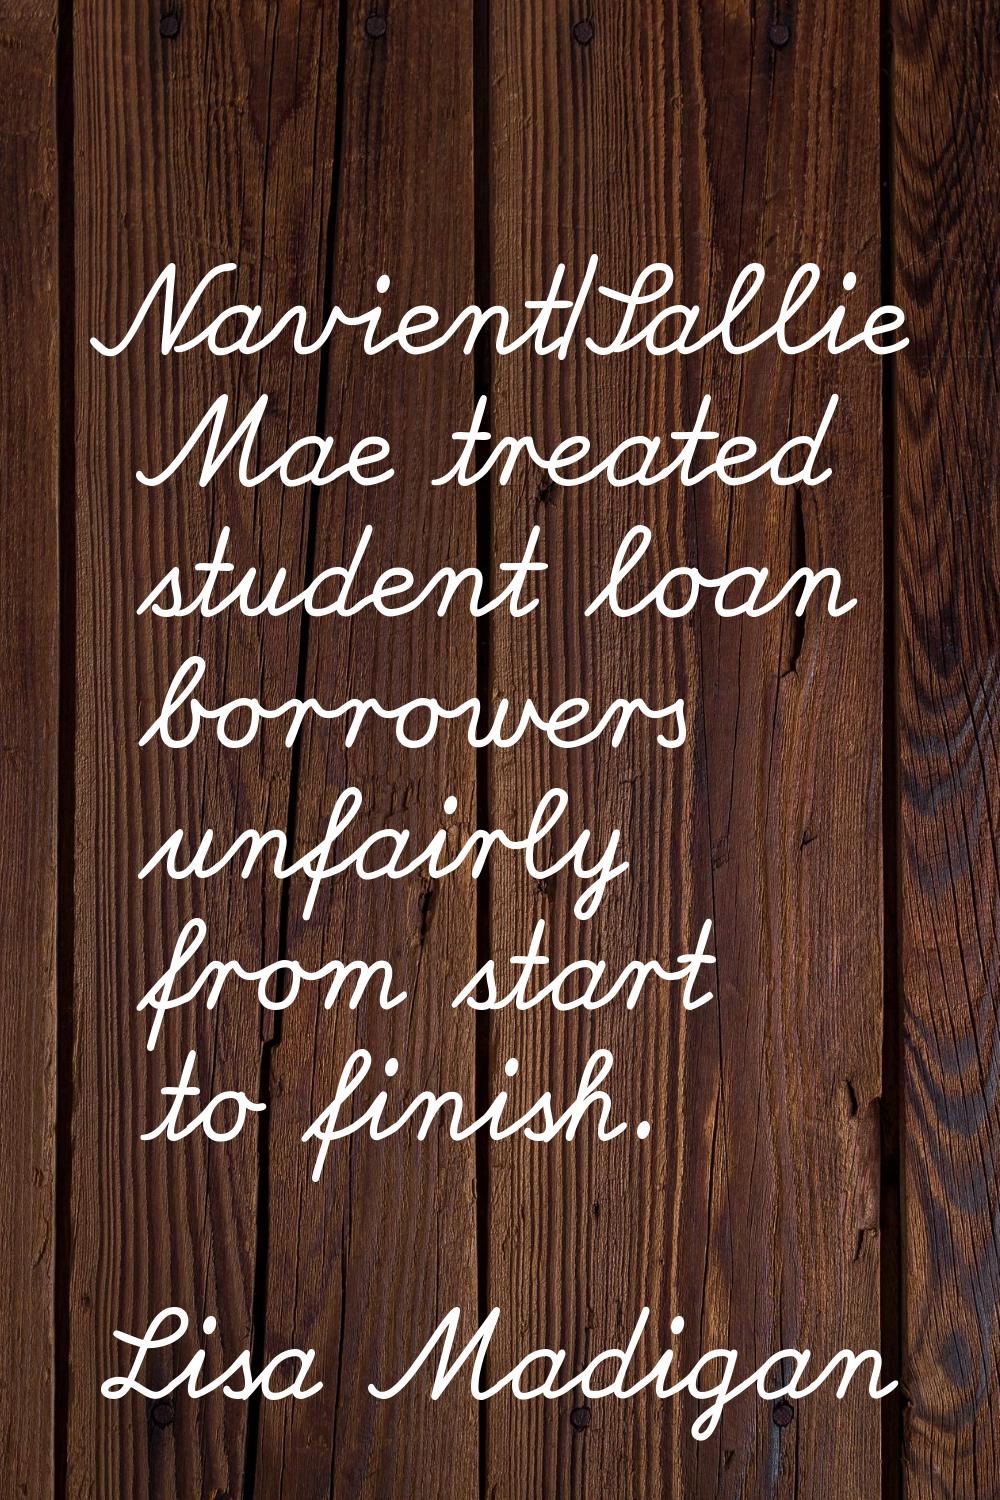 Navient/Sallie Mae treated student loan borrowers unfairly from start to finish.